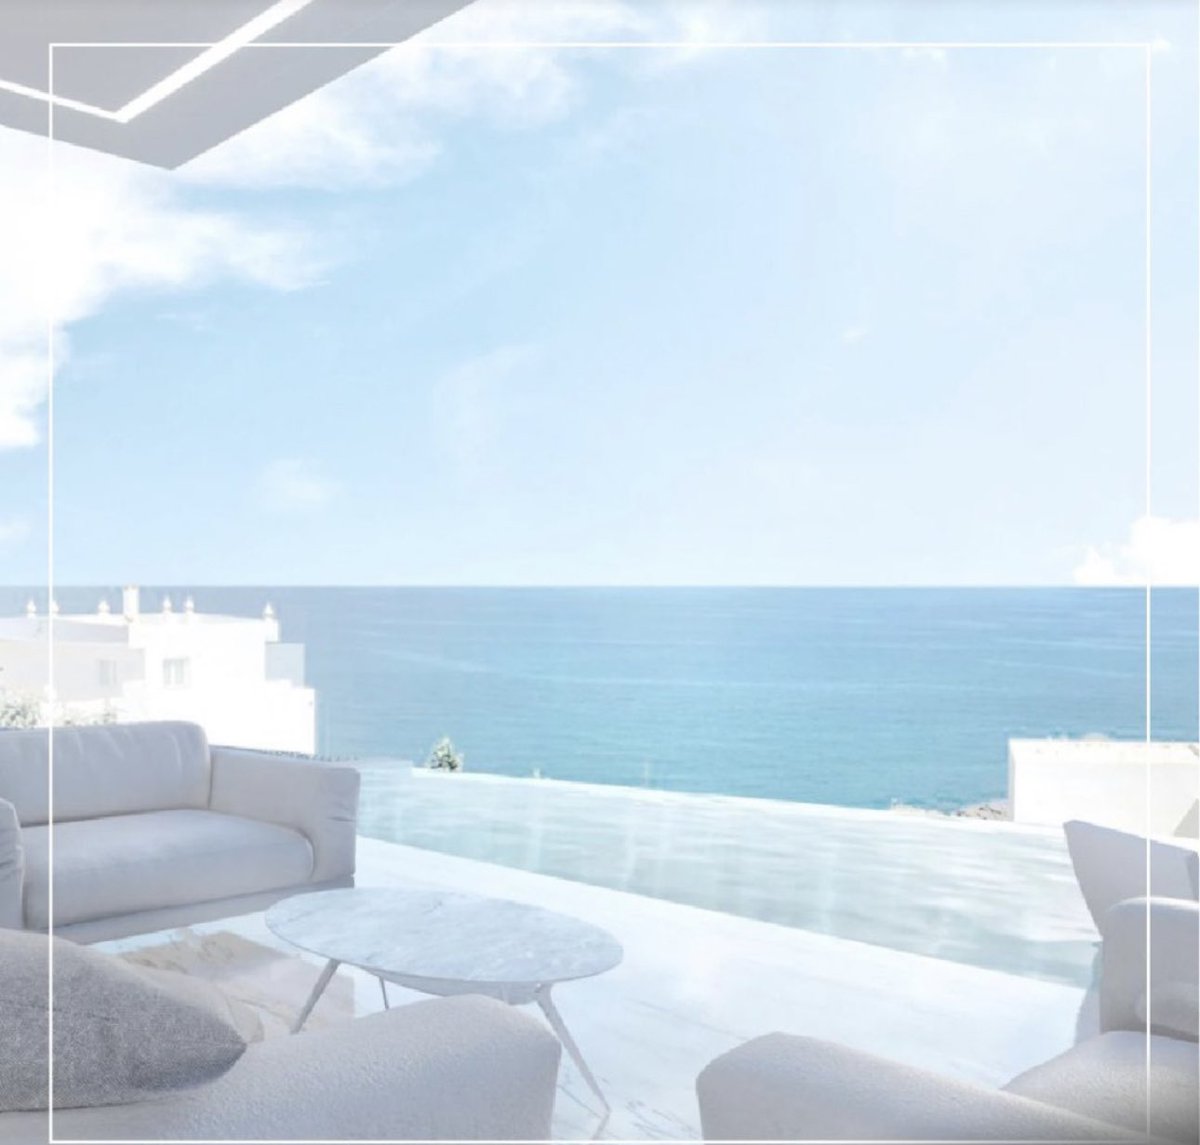 Welcome to Villa Serenity, a construction project with the best sea views 🏡✨ 📍This Villa is located in Punta Chullera, Málaga. The project will be completed in only 10 months once the sale is finalized. Asking price: €1.500.000 Plot: 840 m2 Build: 260 m2 Bed: 3